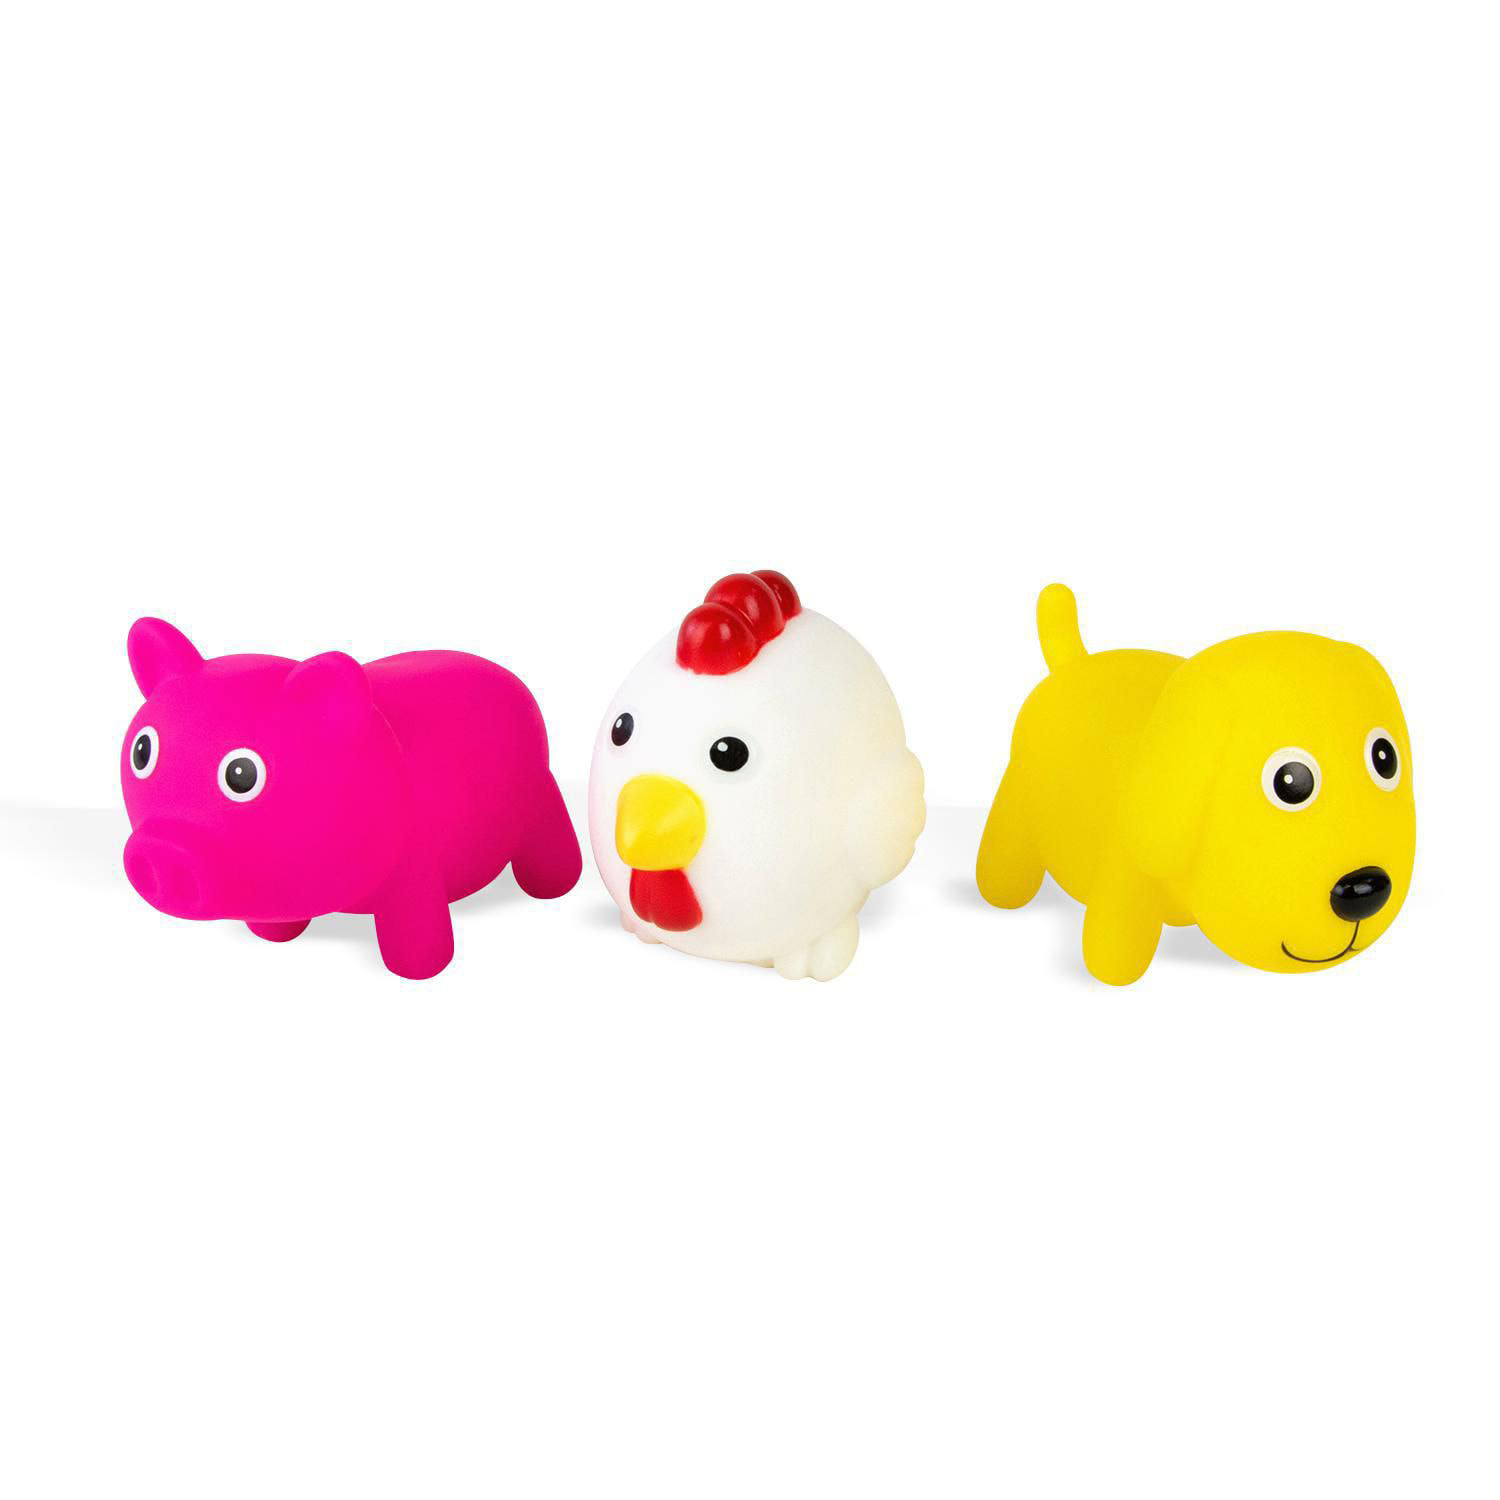 Spark Create Imagine Lamb Plush Toy,for all ages